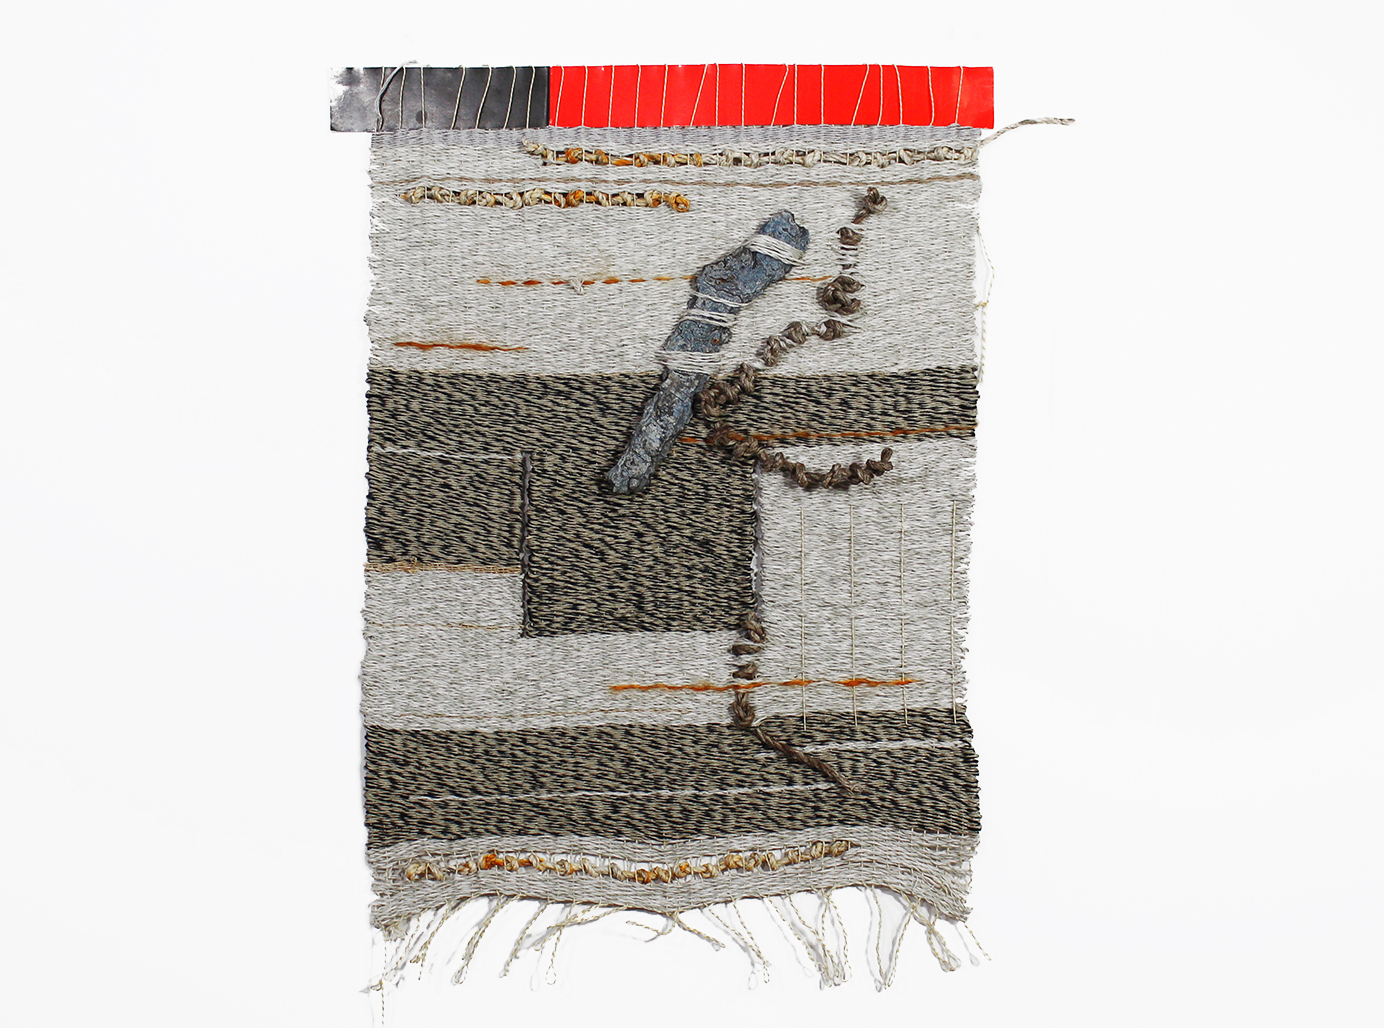 UNTITLED, 2020 cotton, wool, mixed media, 21 1/4 x 12 1/2 in